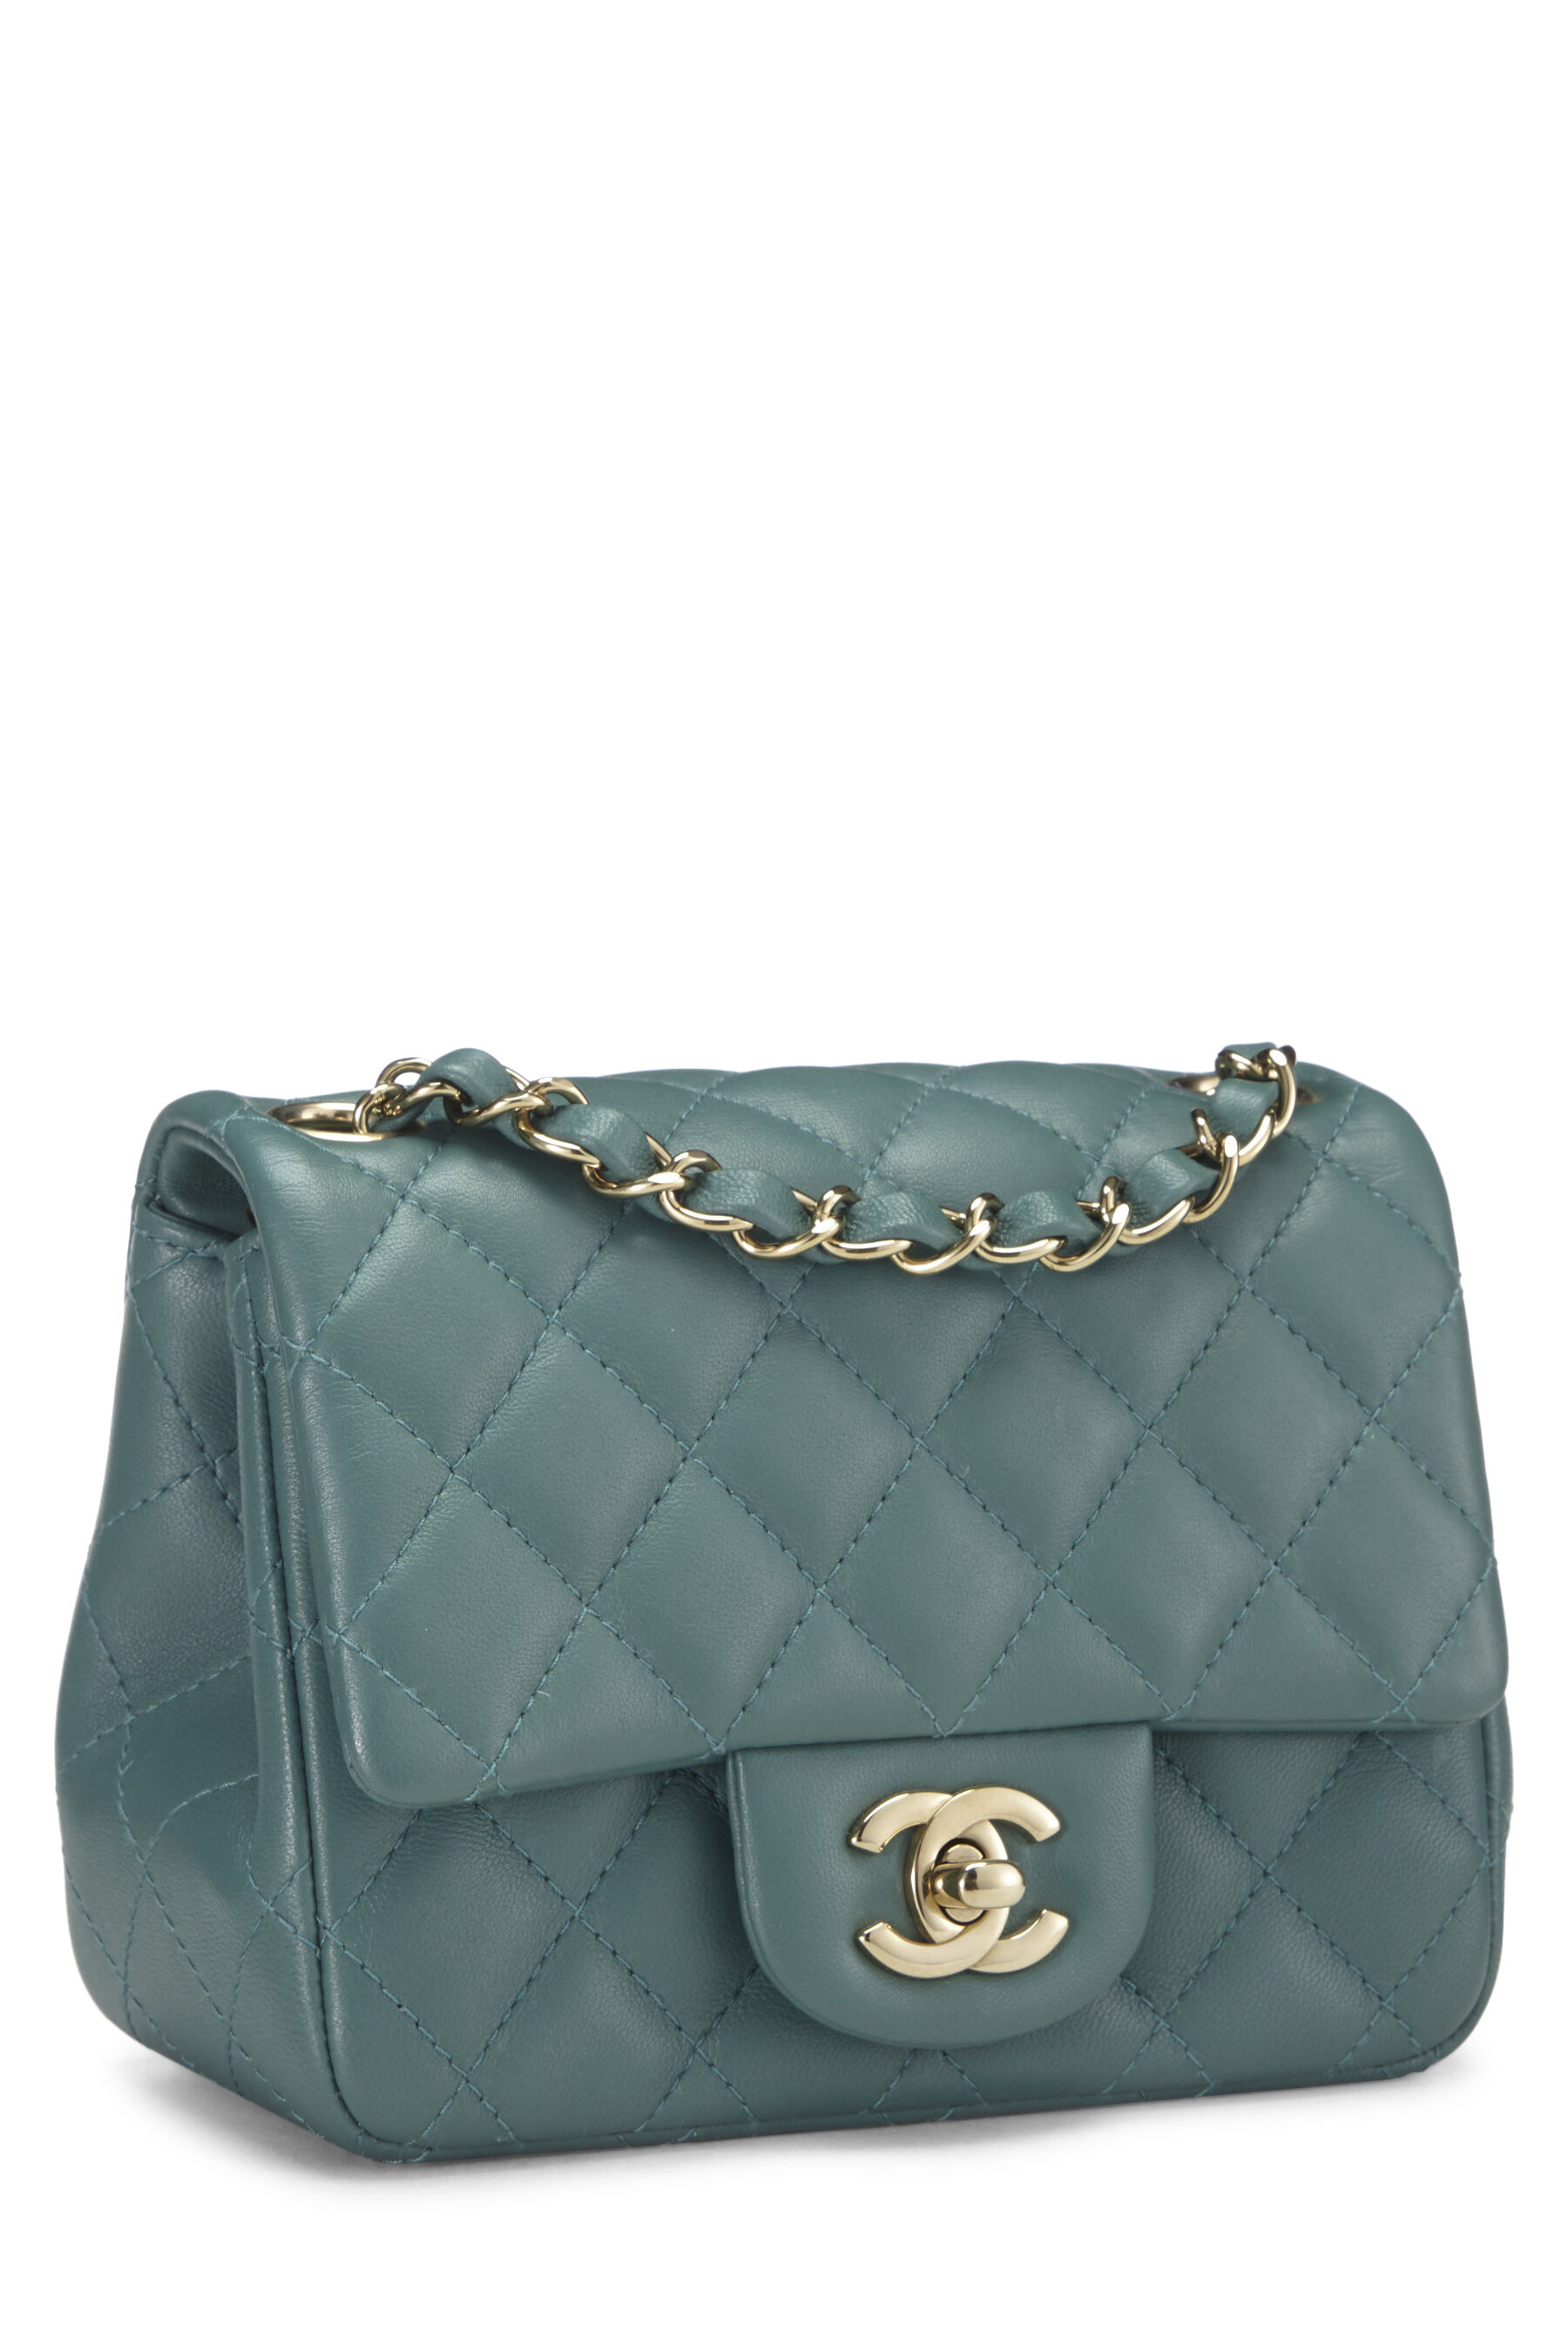 Chanel - Green Quilted Lambskin Classic Square Flap Mini